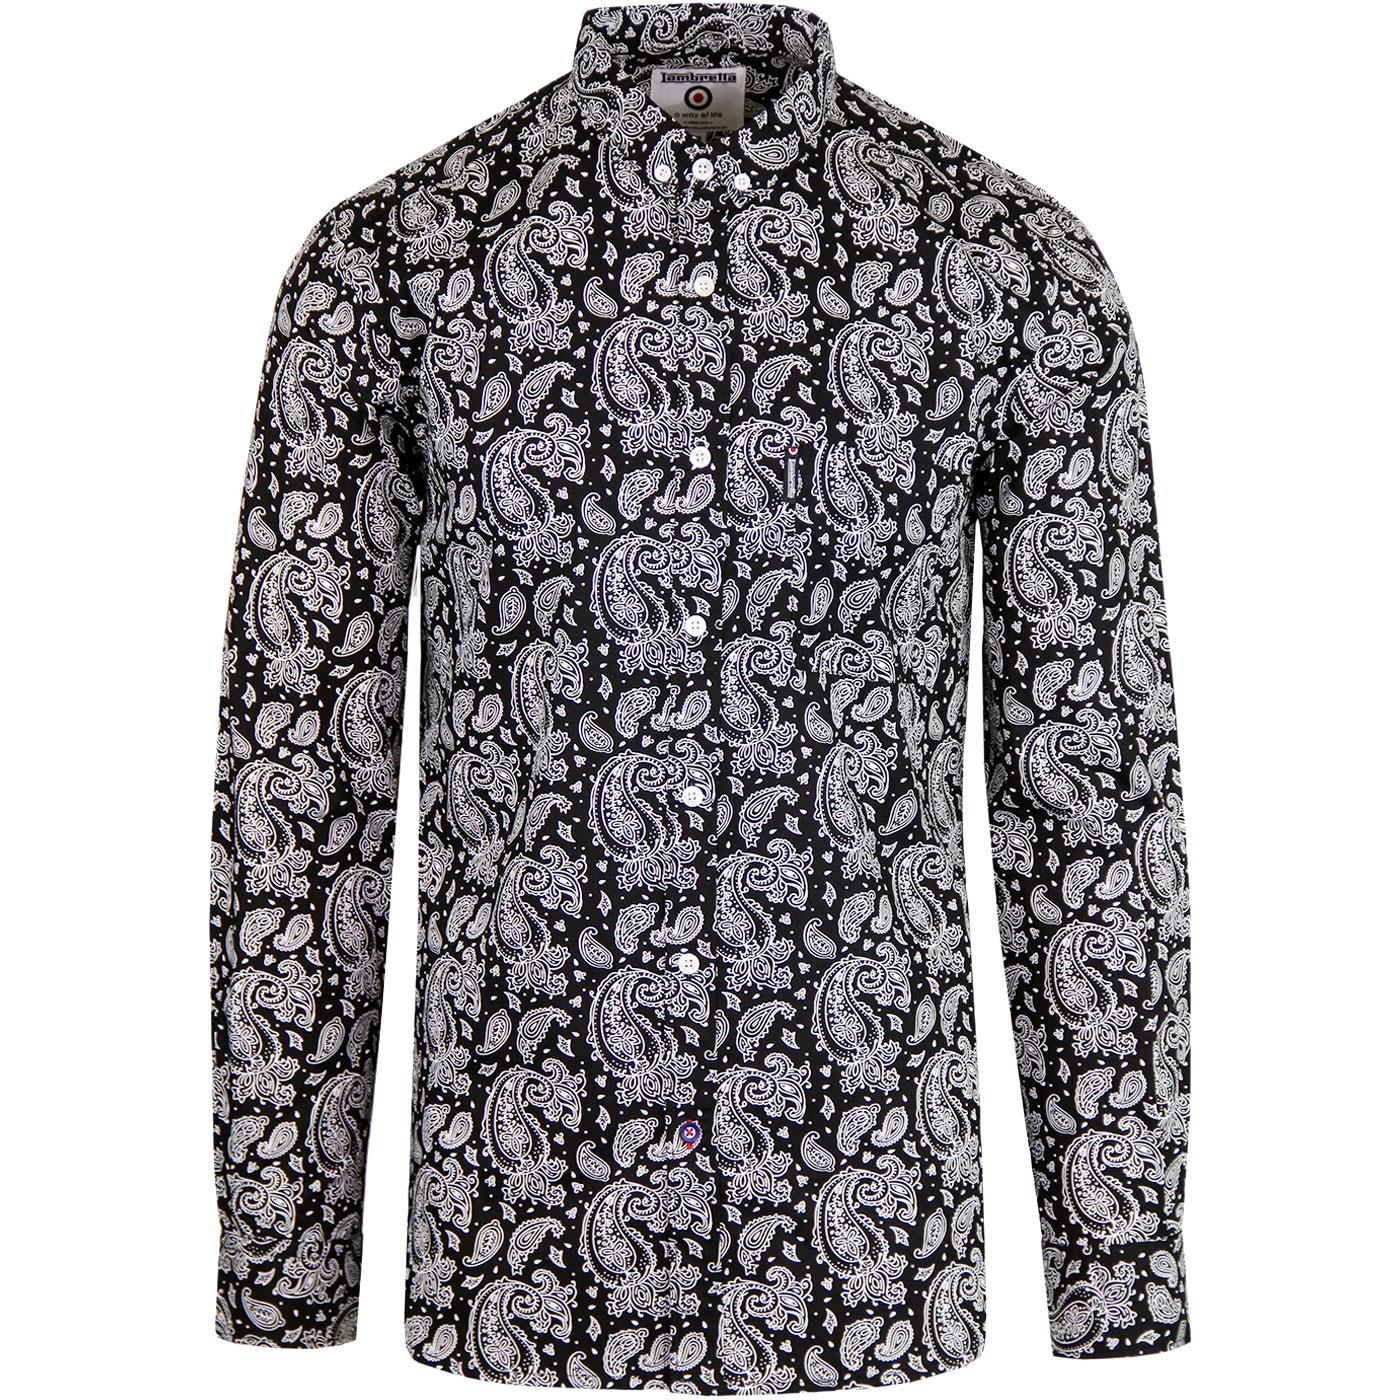 LAMBRETTA Sixties Mod All Over Paisley Shirt in Black/White